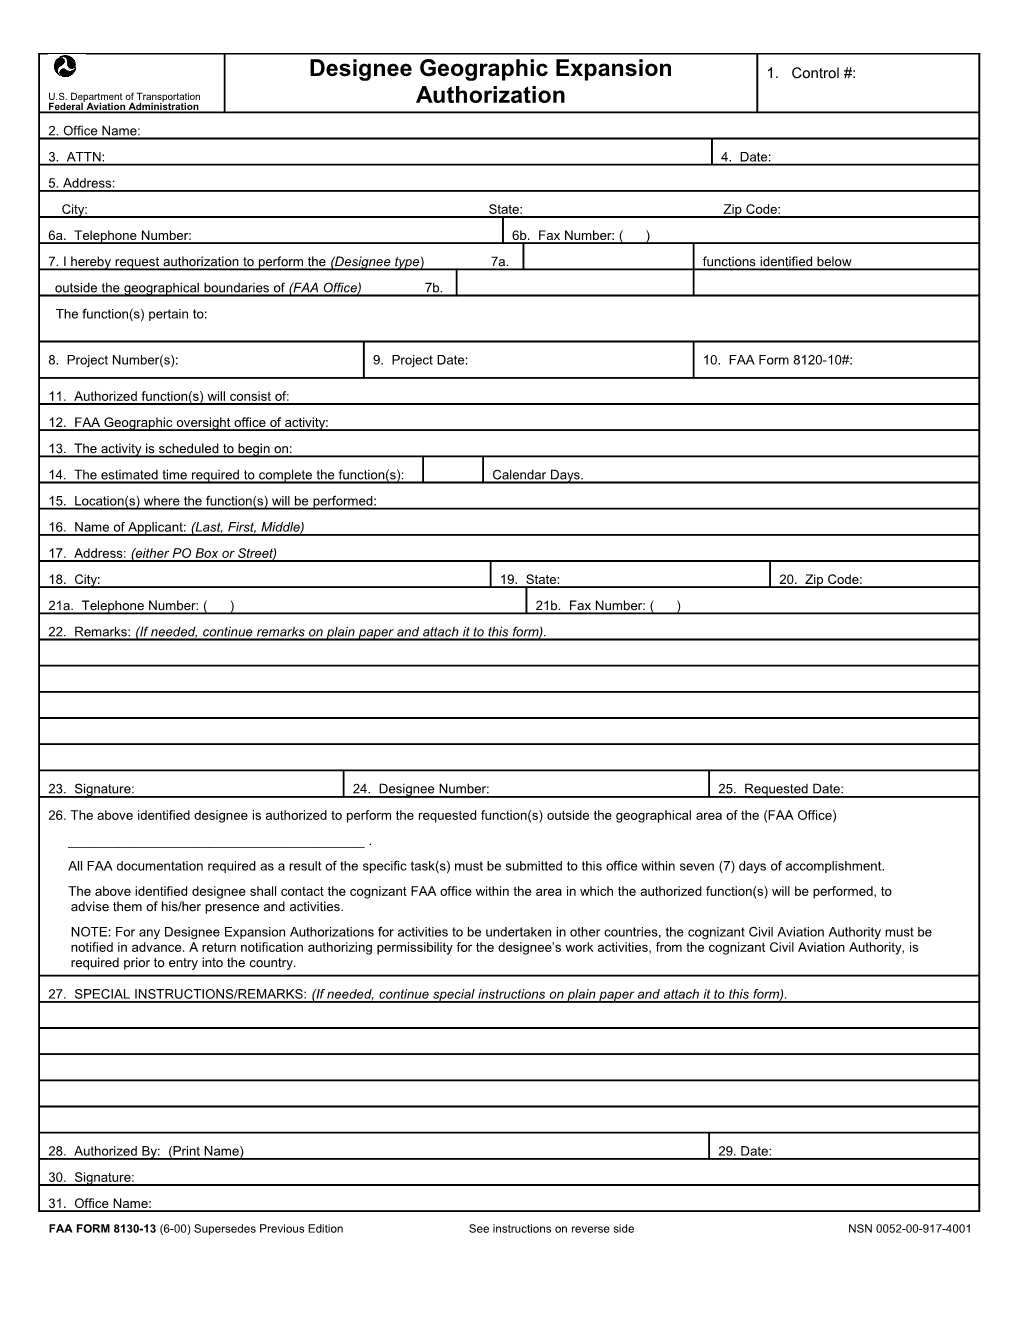 FAA FORM 8130-13 (6-00) Supersedes Previous Edition See Instructions on Reverse Side NSN